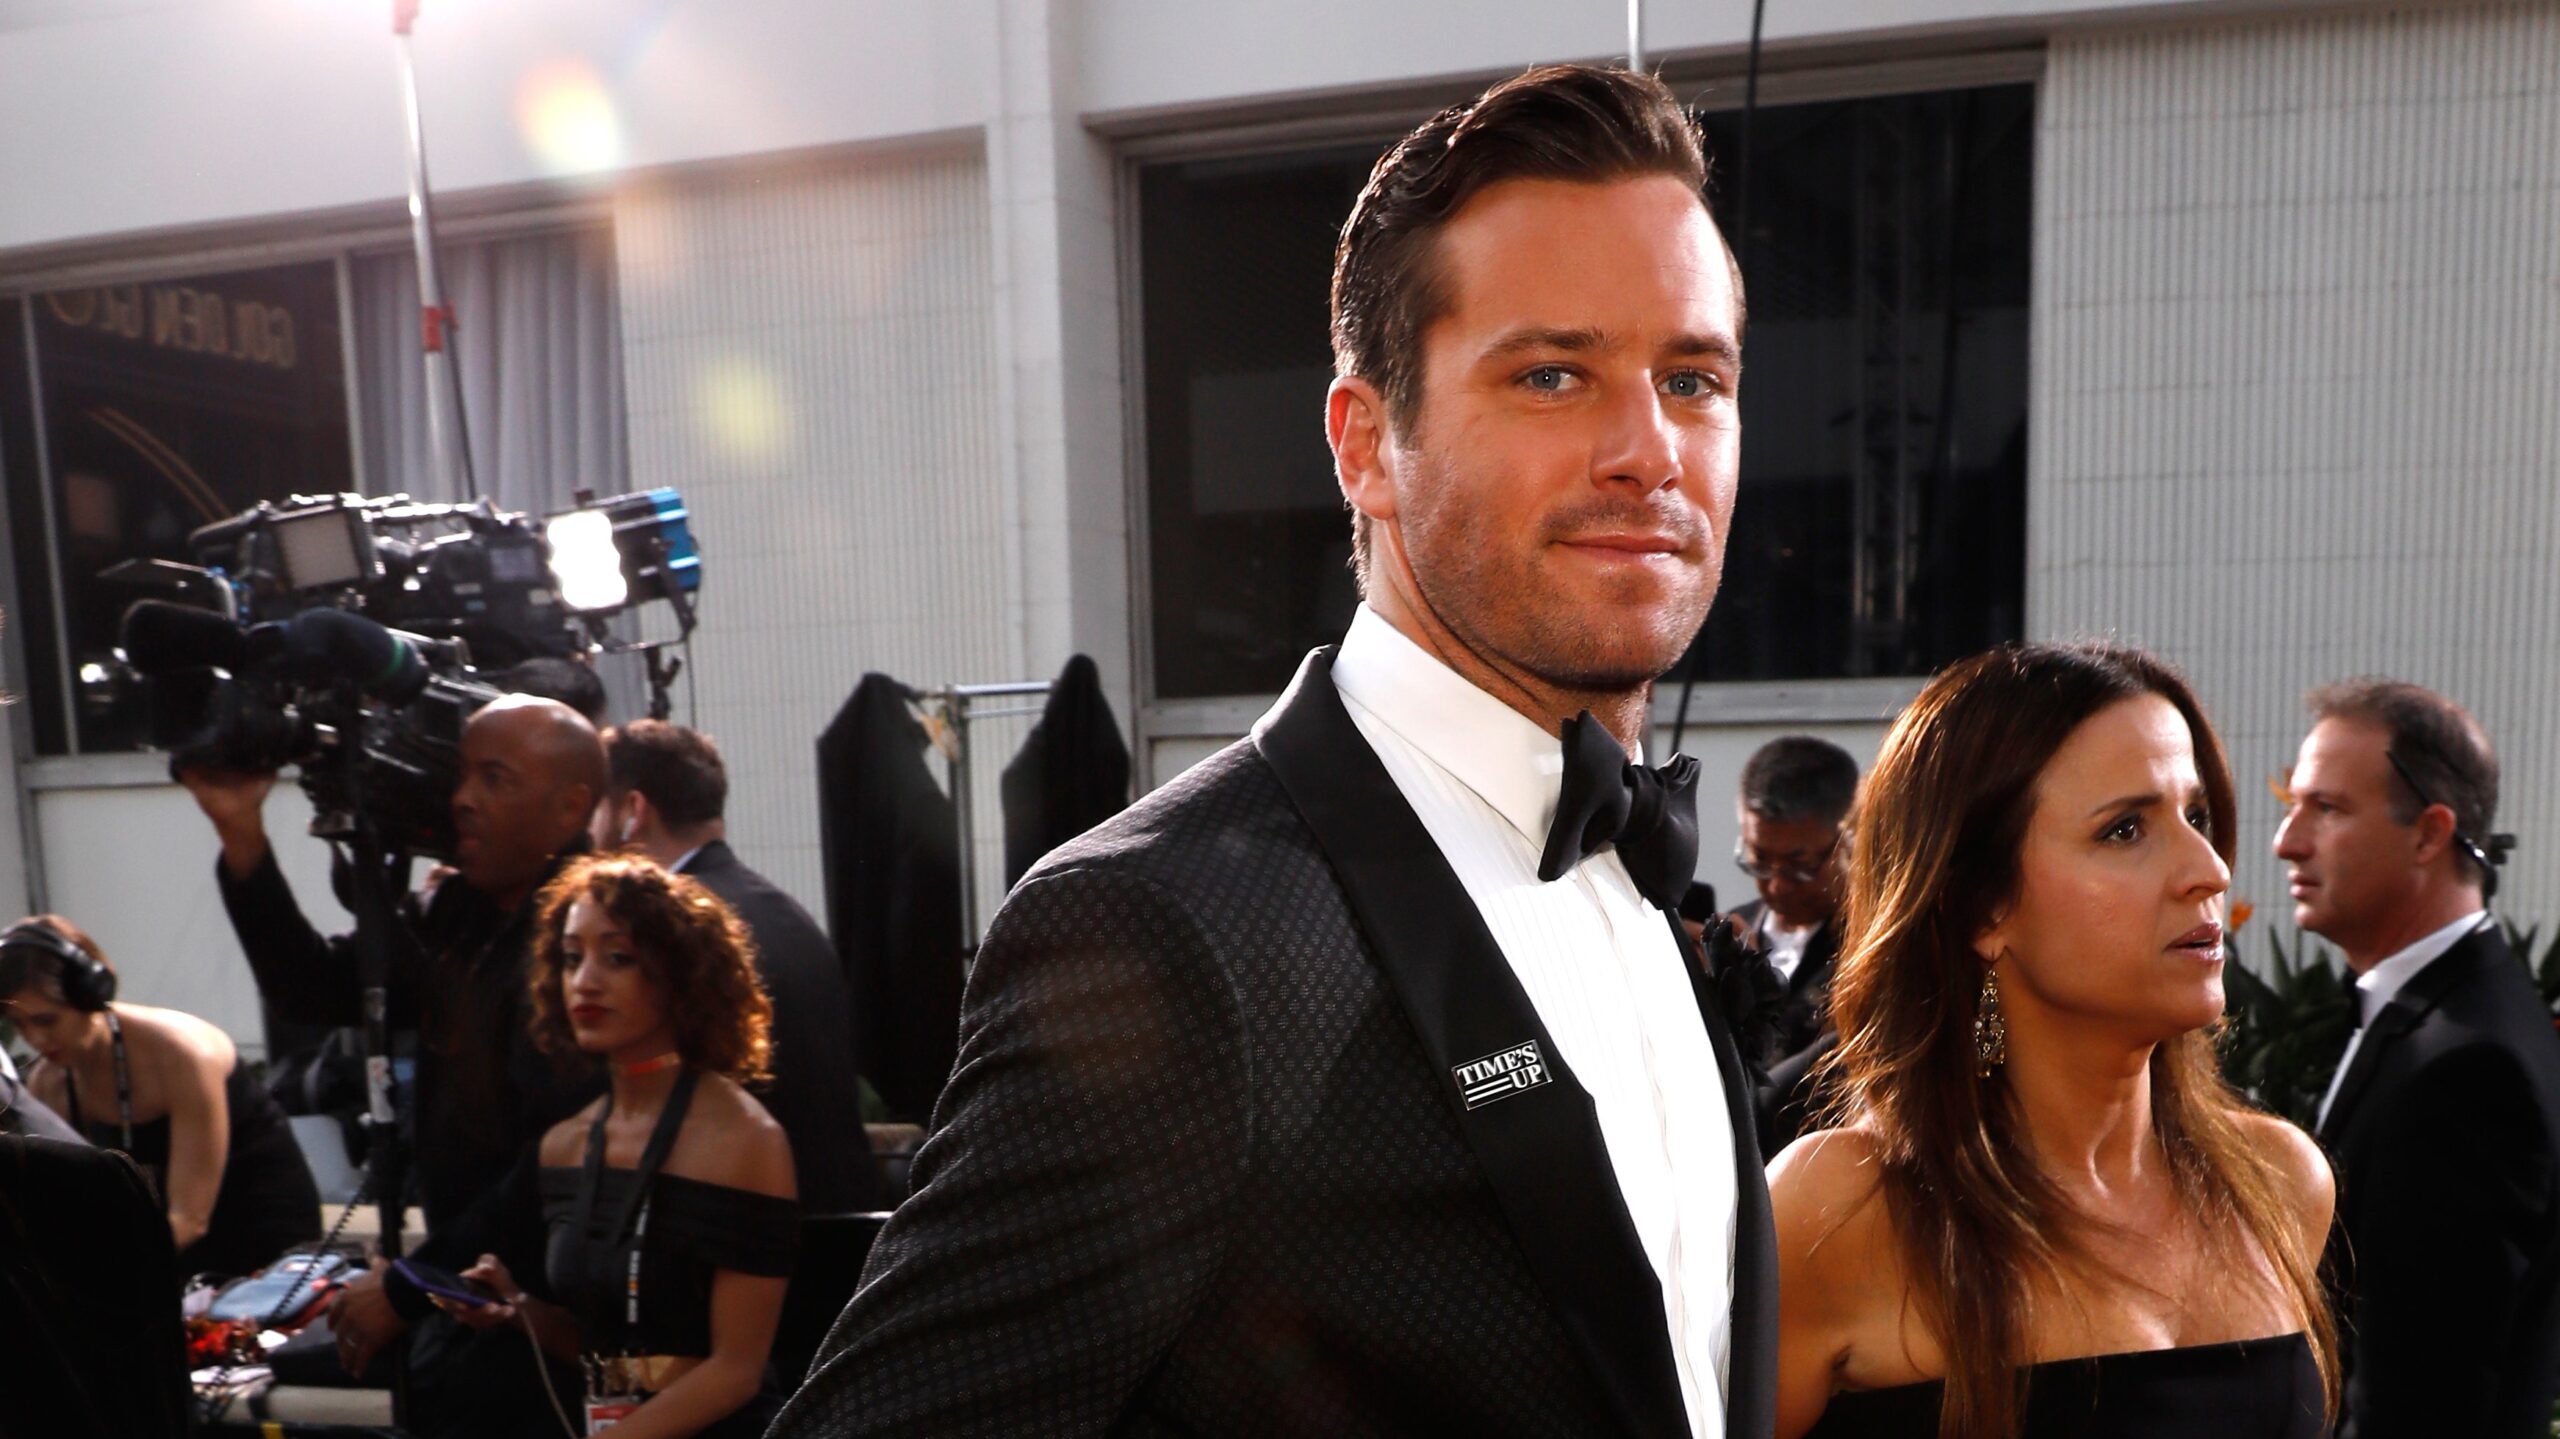 Armie Hammer’s Rollercoaster Financial Journey: From Millions to Thousands